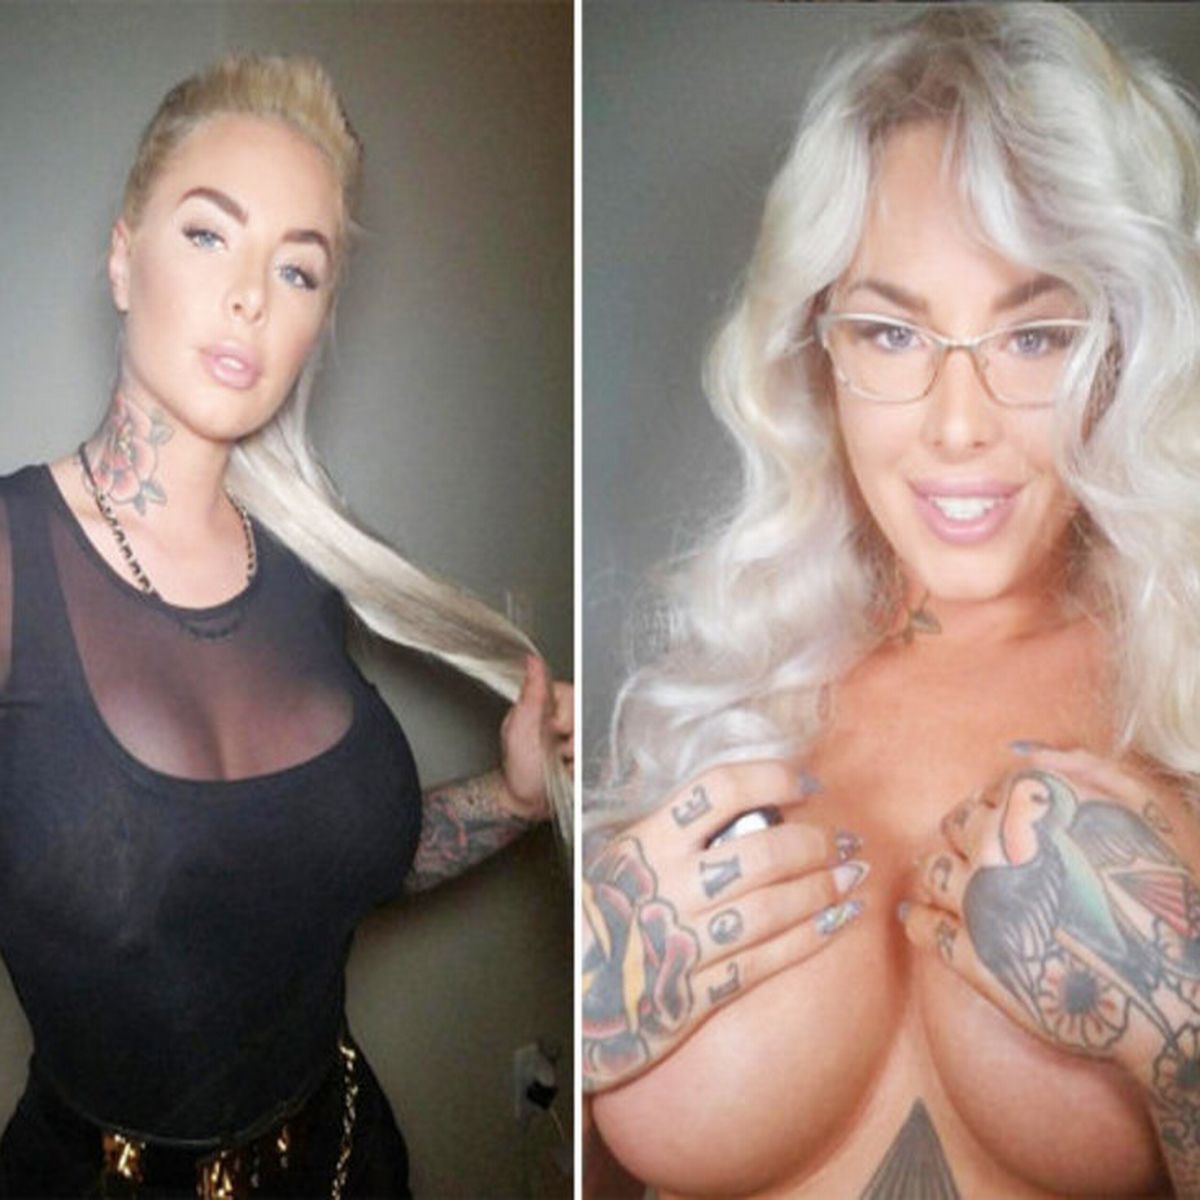 ashleigh milne recommends christy mack before implants pic